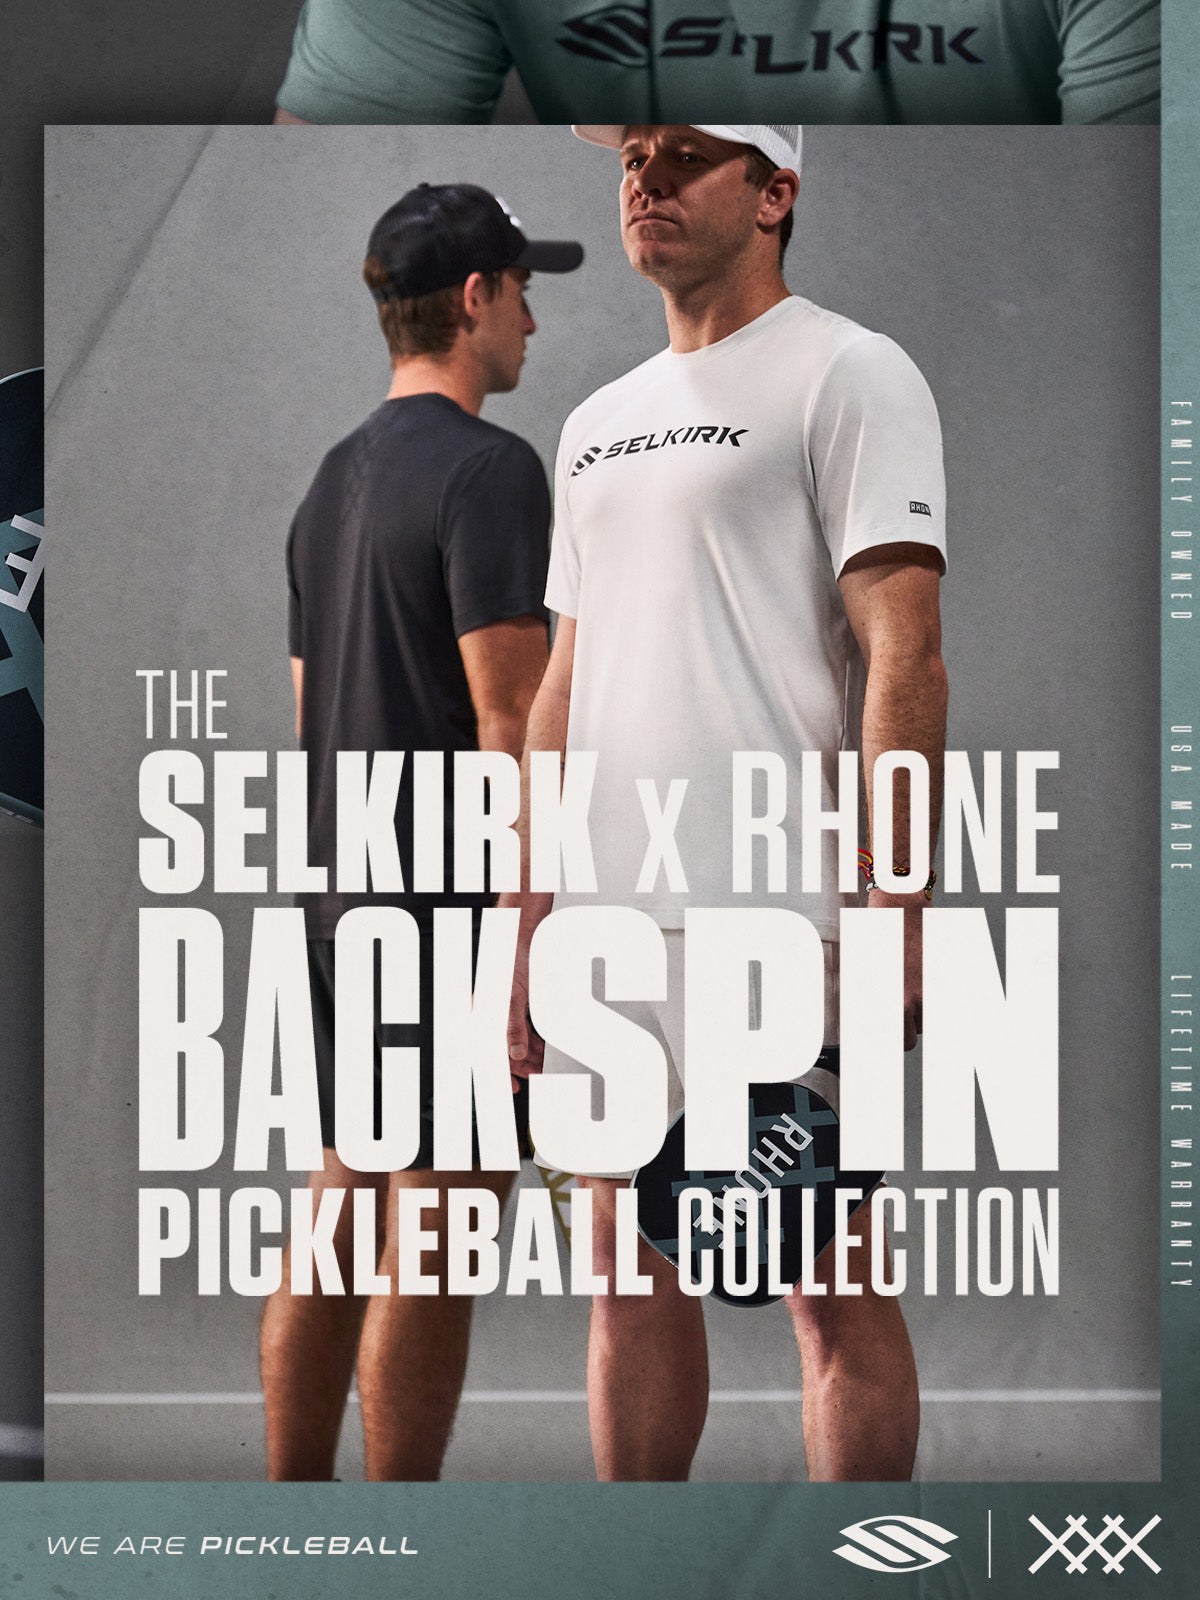 Banner with text reading the Selkirk x Rhone Backspin pickleball collection